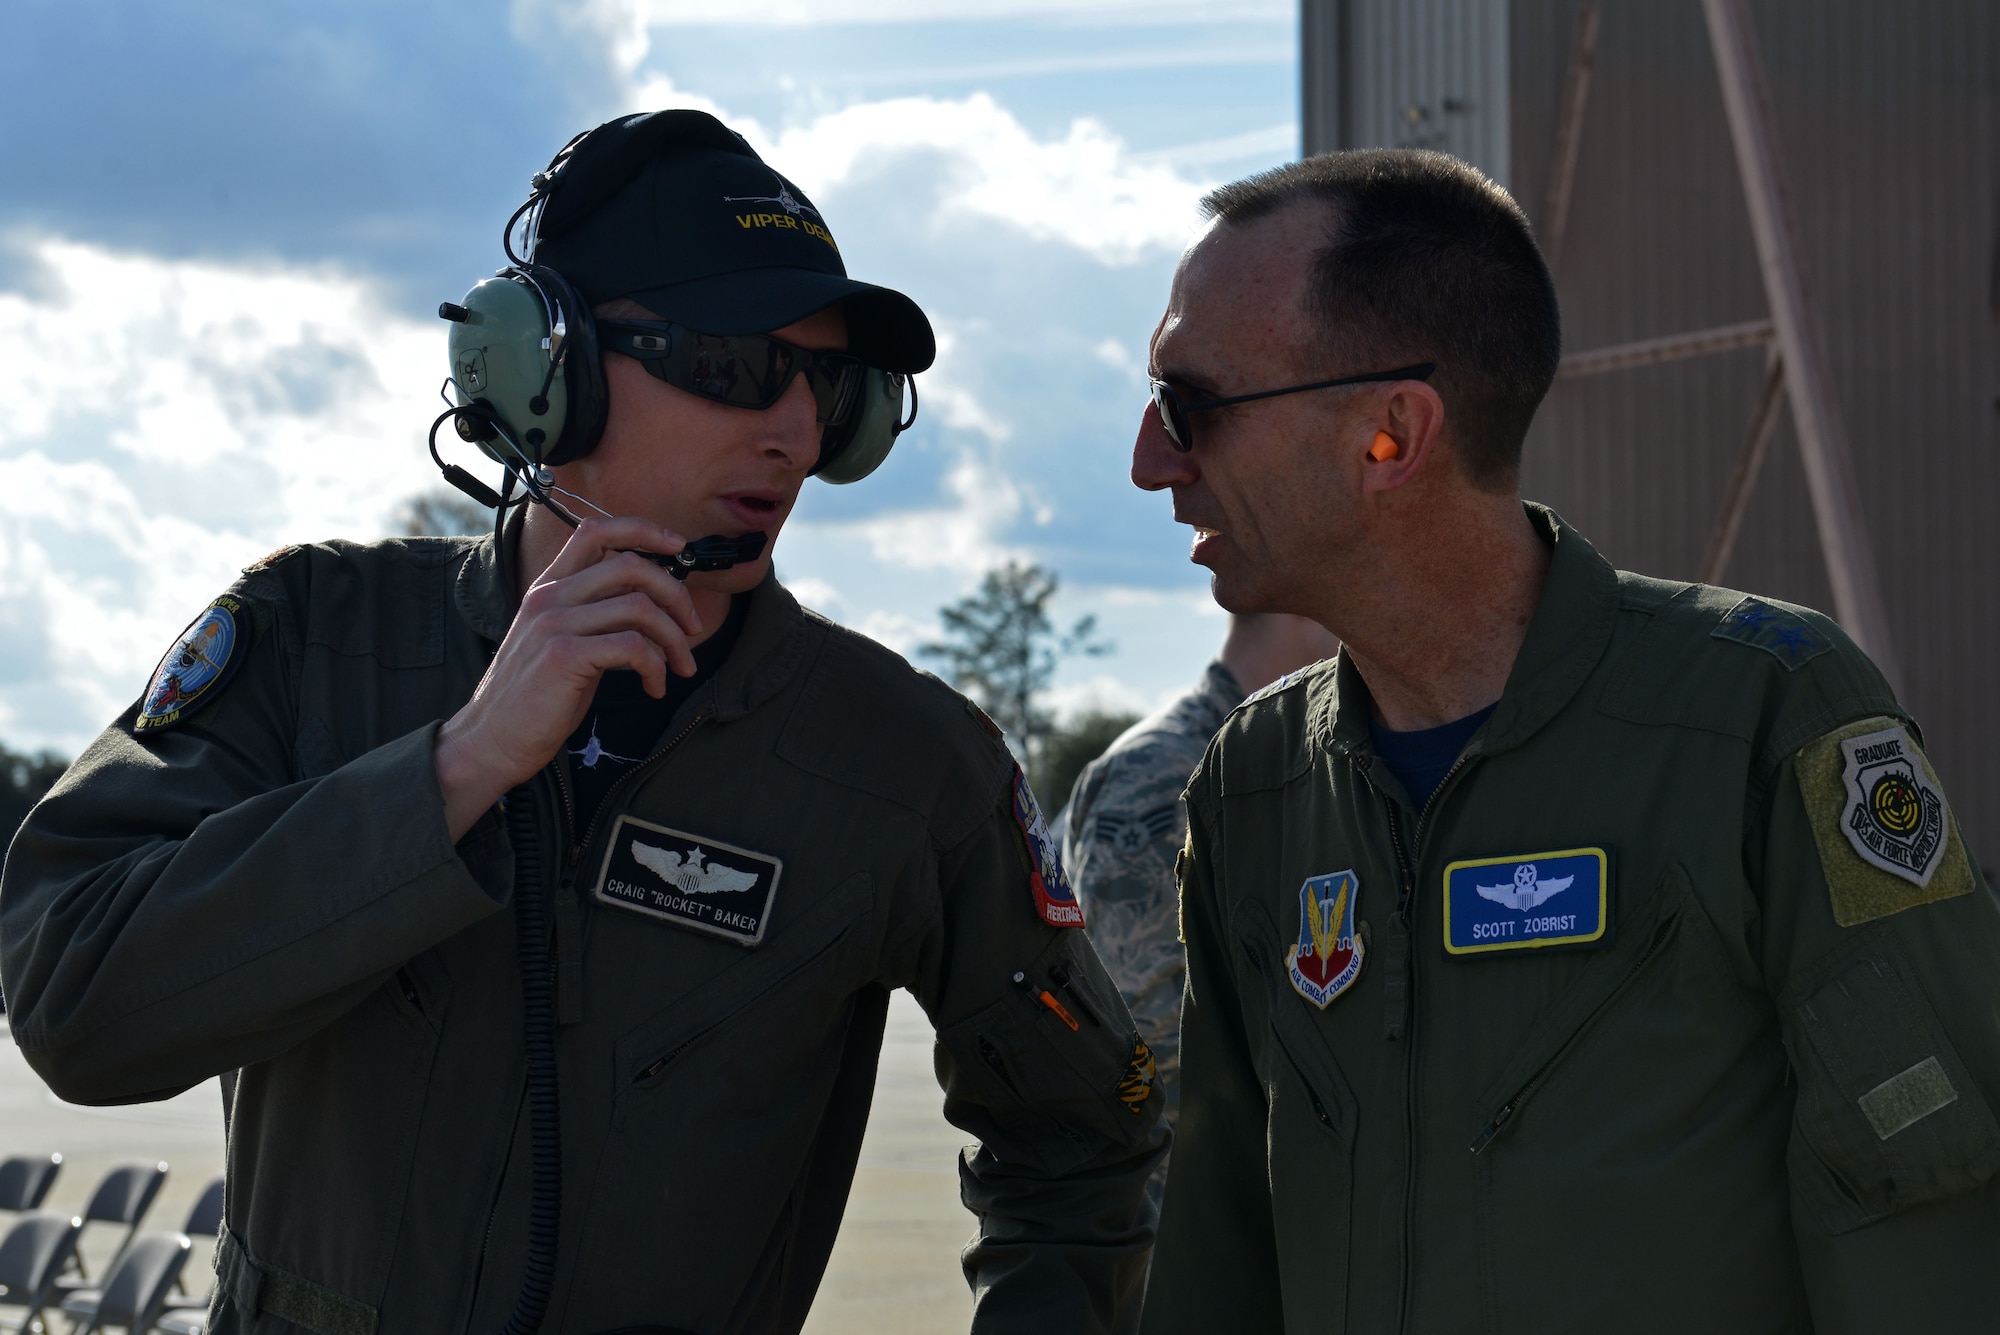 U.S. Air Force Maj. Gen. Scott Zobrist(right), 9th Air Force commander, speaks with Maj. Craig Baker(left), former F-16 Viper Demonstration Team pilot, during the third level of certification at Shaw Air Force Base, S.C., Jan. 20, 2017. The process involves four levels of certification (group commander, wing commander, numbered air force and ACC commander) and showcases the upcoming year’s demonstration, as well as certifies the new demo team pilot on the maneuvers. (U.S. Air Force photo by Airman 1st Class Destinee Sweeney)
